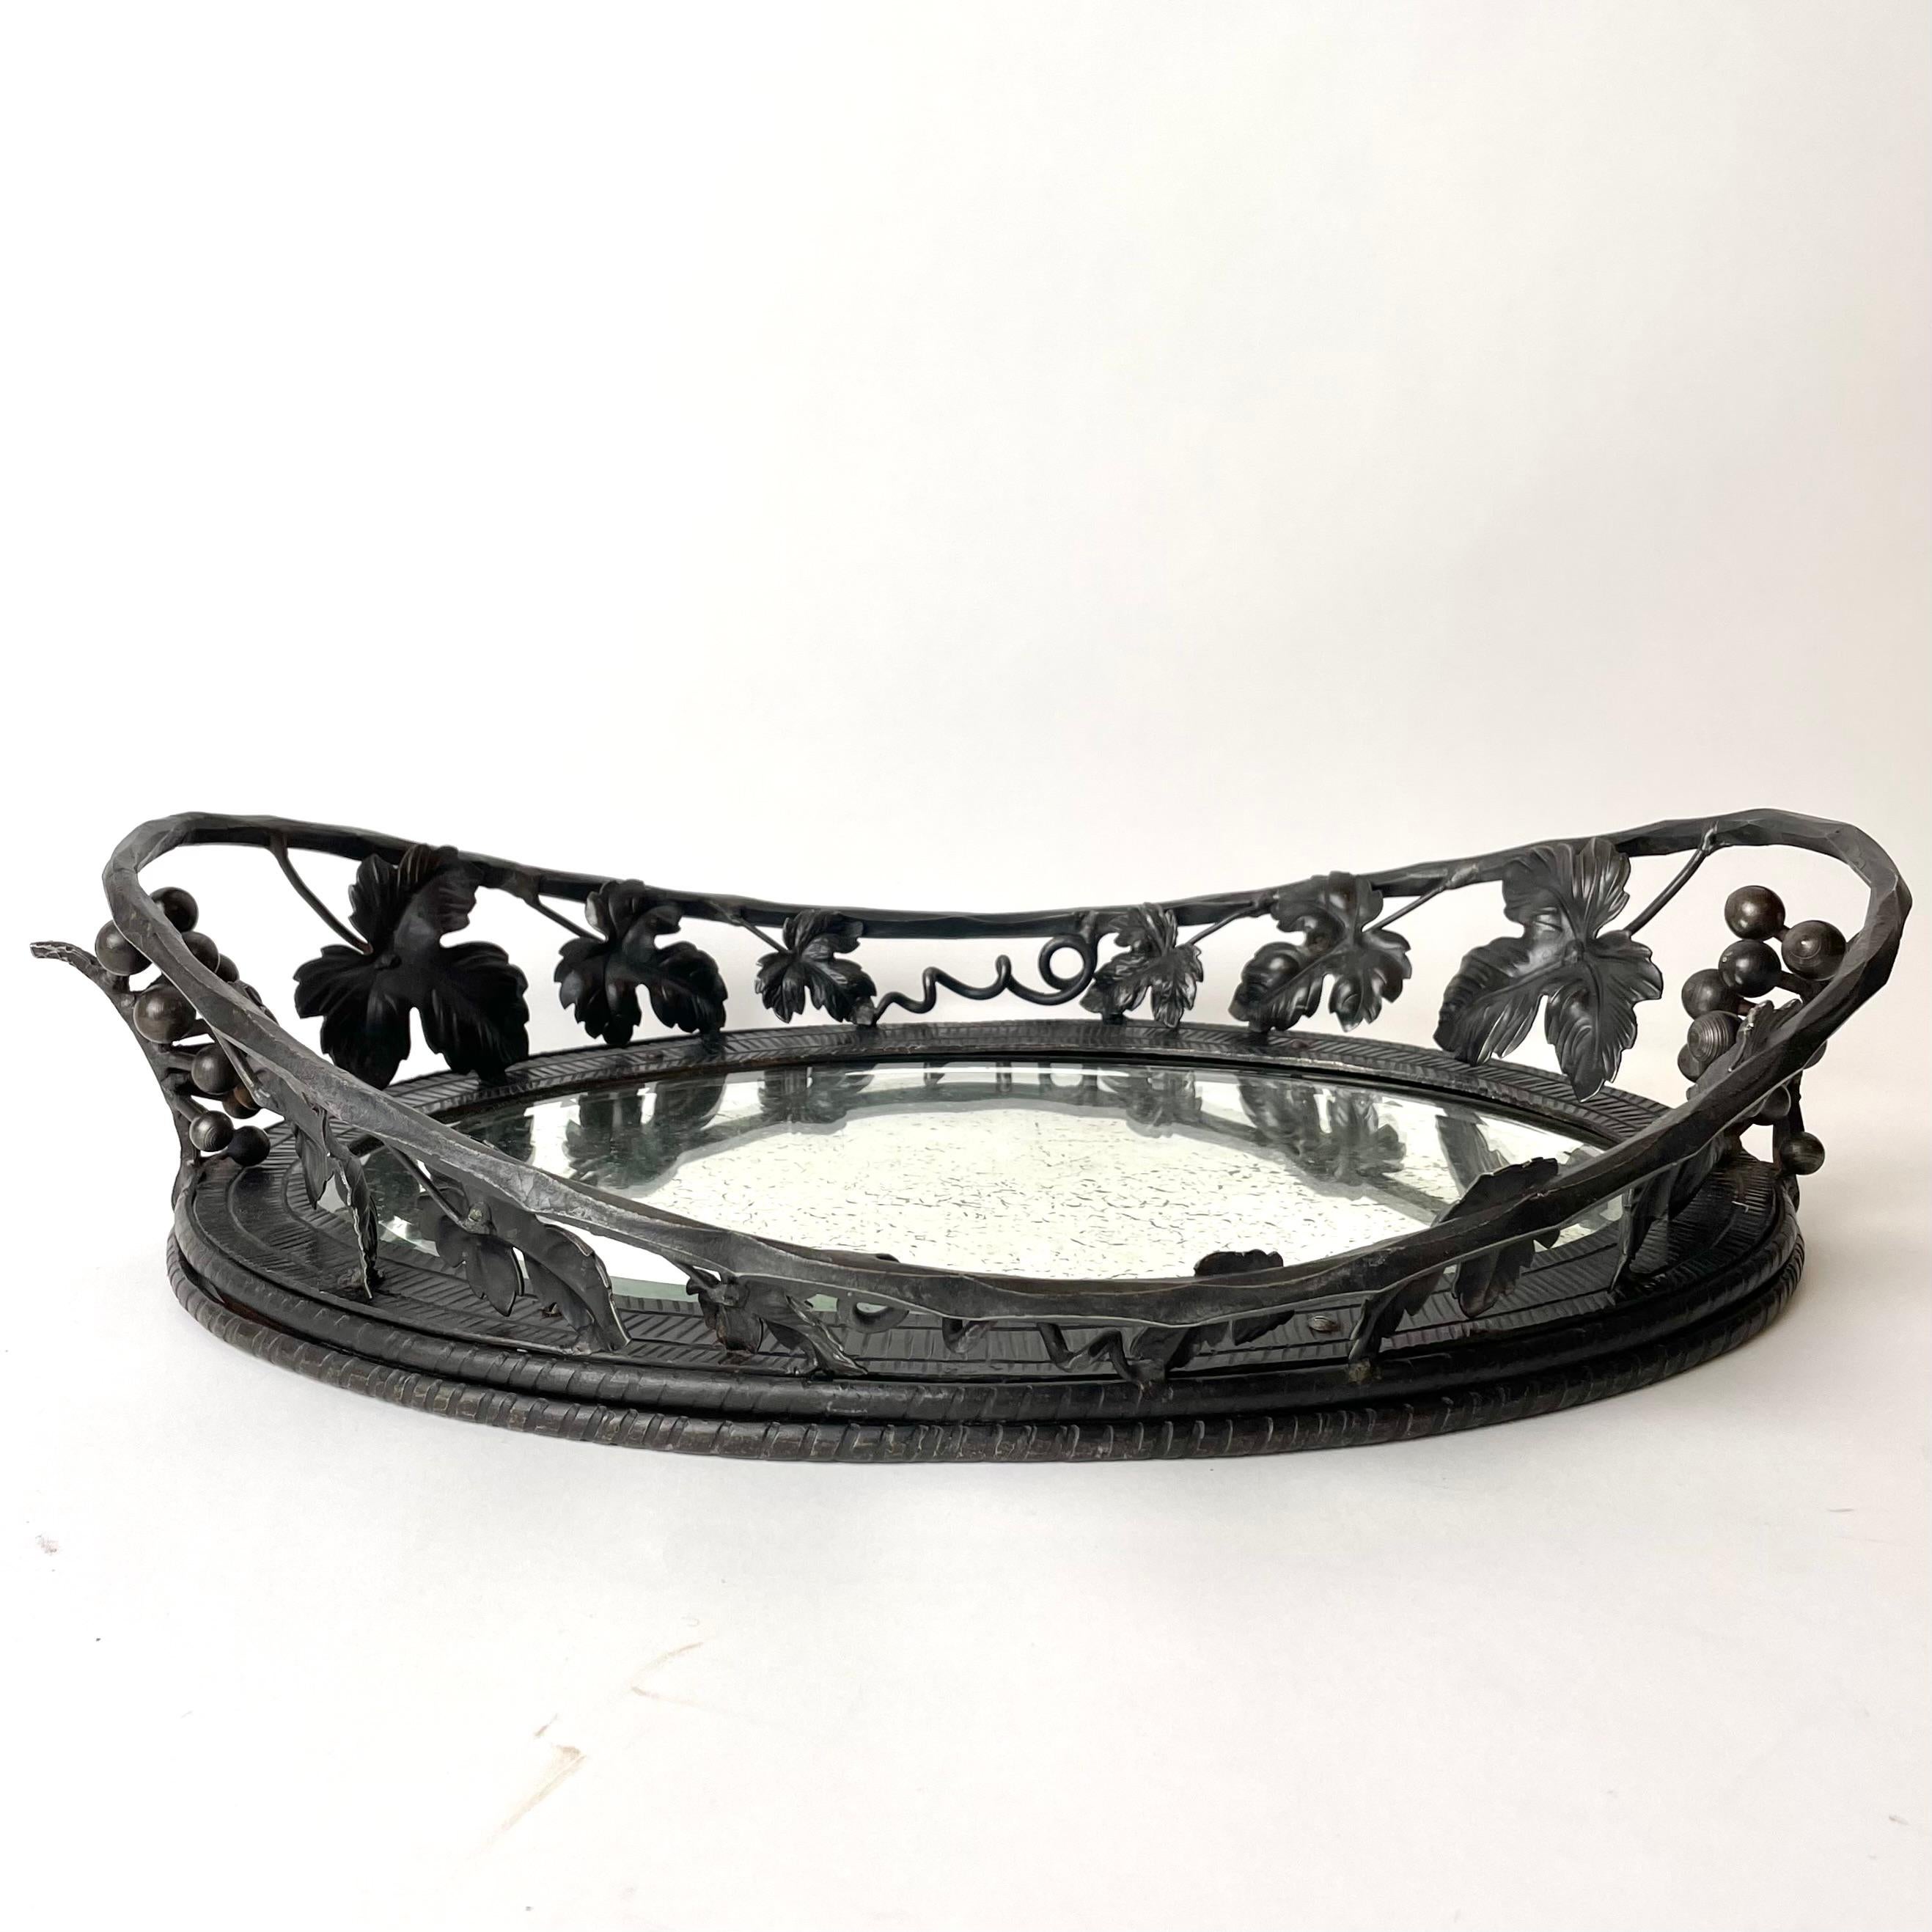 Beautifully decorated Fruit Bowl in wrought iron from the 1920s. Elegantly decorated with grapes and grape leaves. Faceted mirror glass with a charming patina. (See pictures)

Wear consistent with age and use.